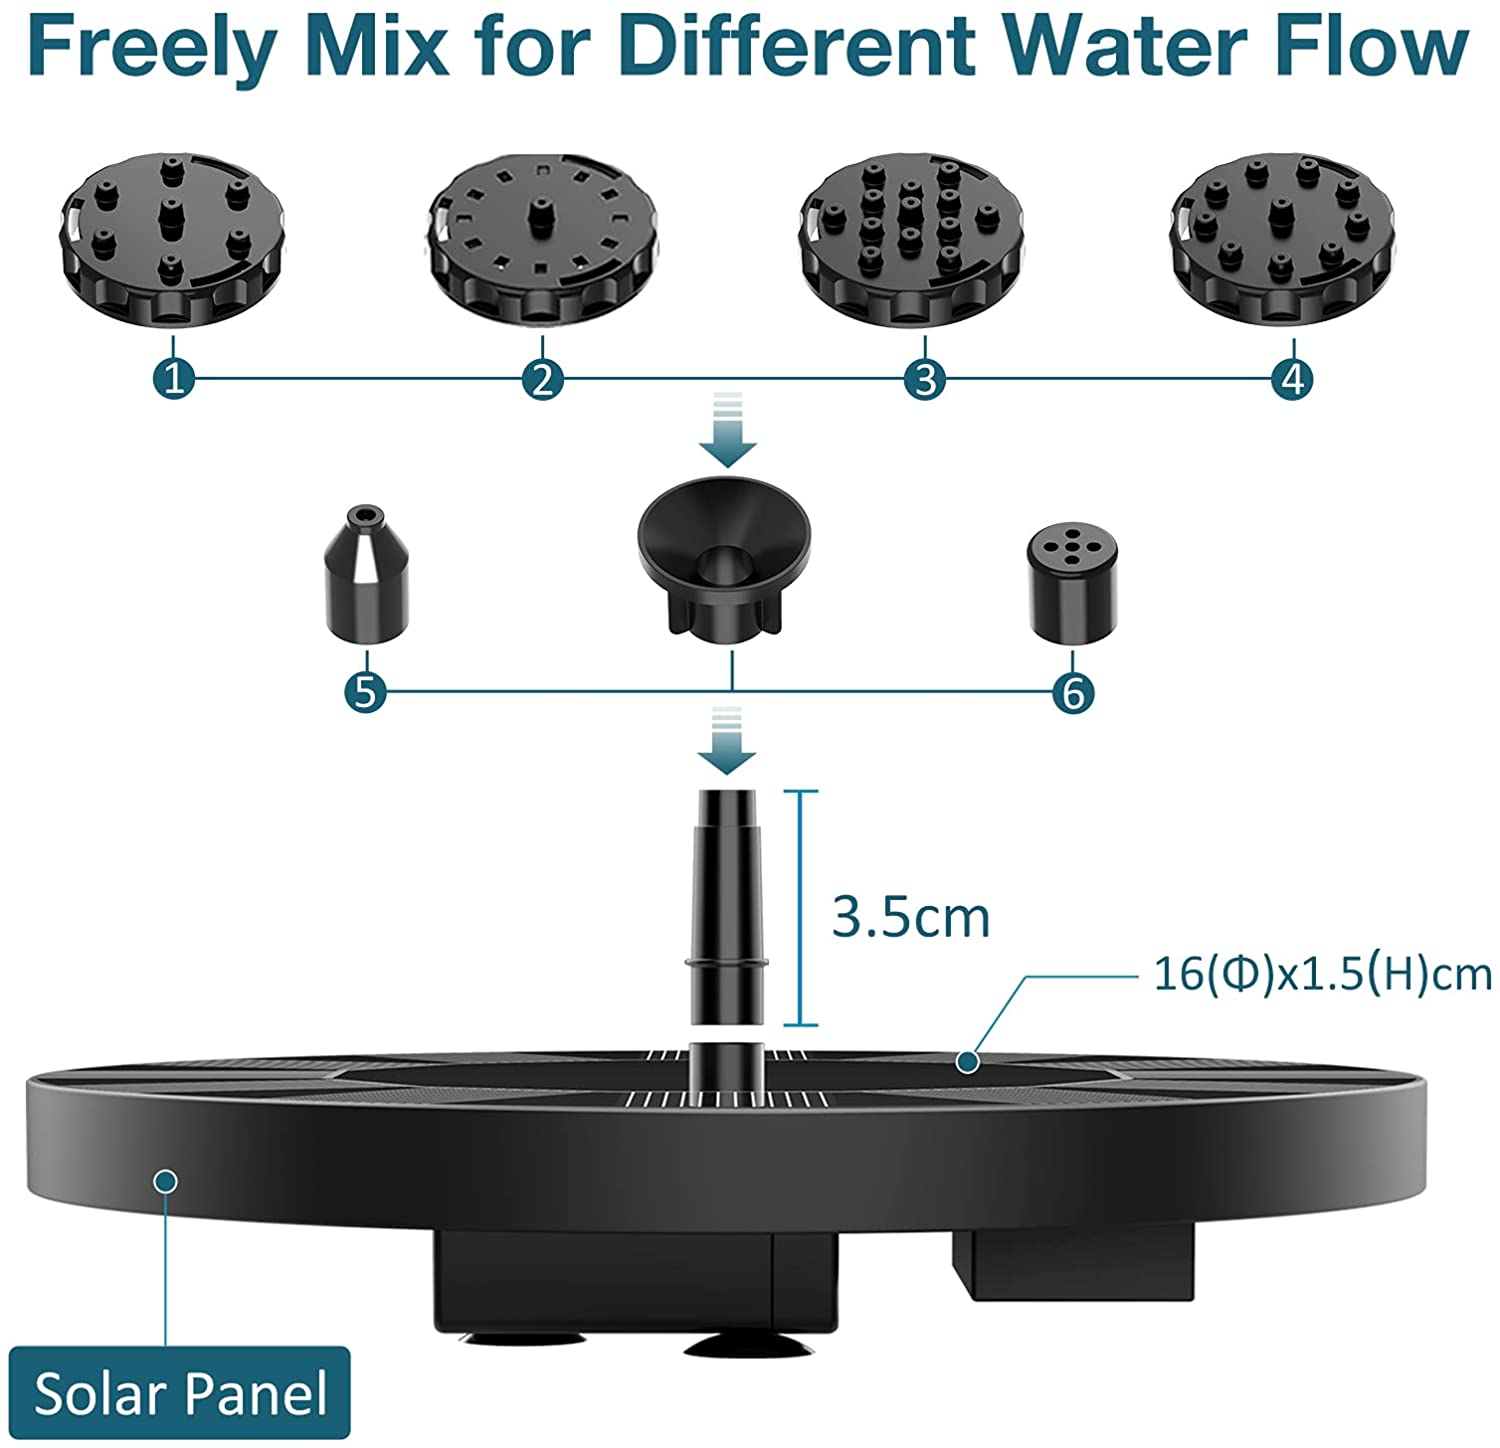 1.5W Solar Fountain Pump, Freely Mix for Different Water Flow 5 3.Scm 16